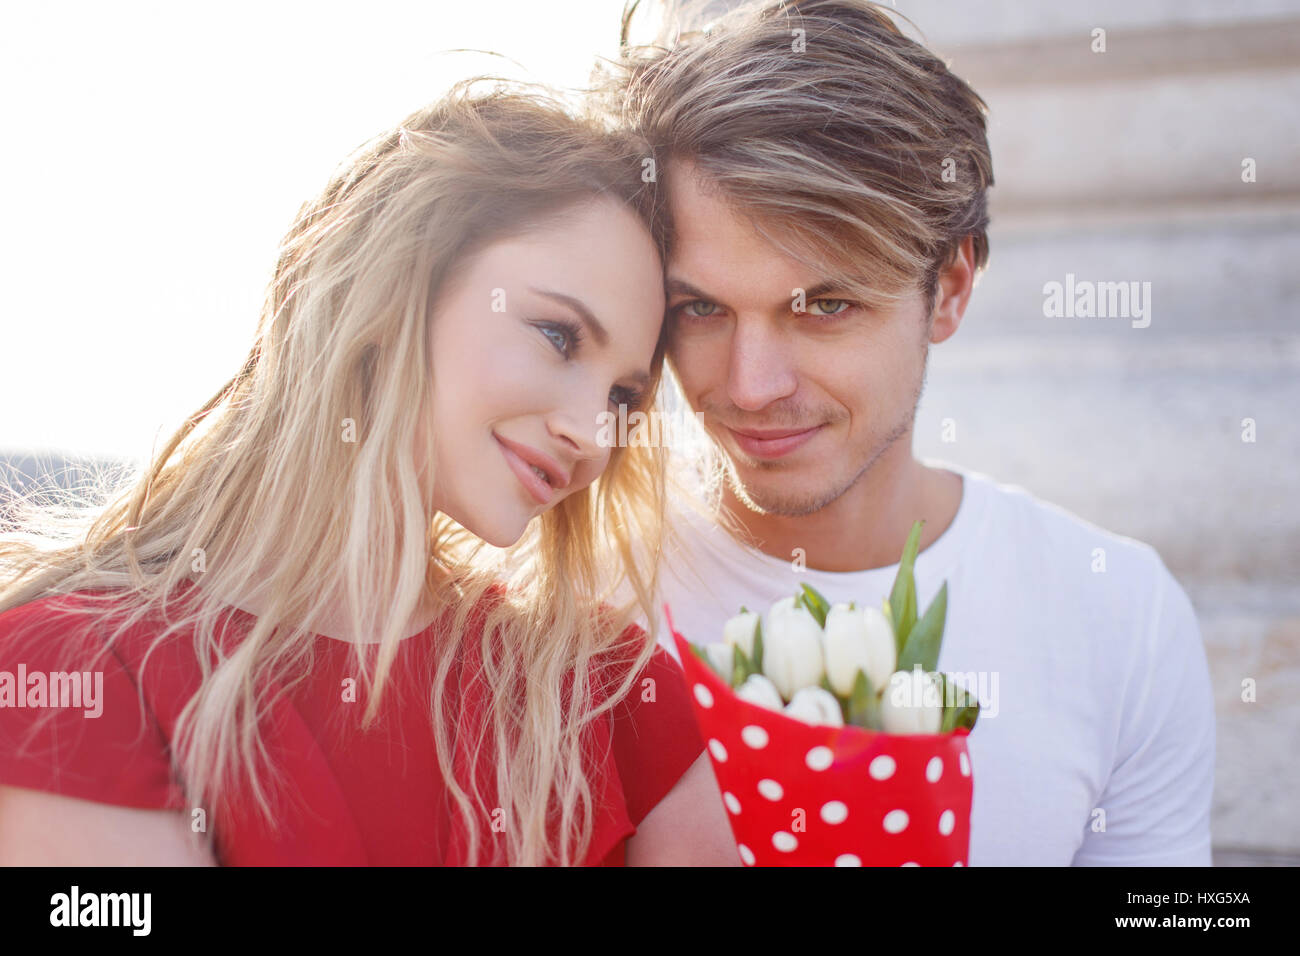 Young woman in love with boyfriend outdoor portrait Stock Photo